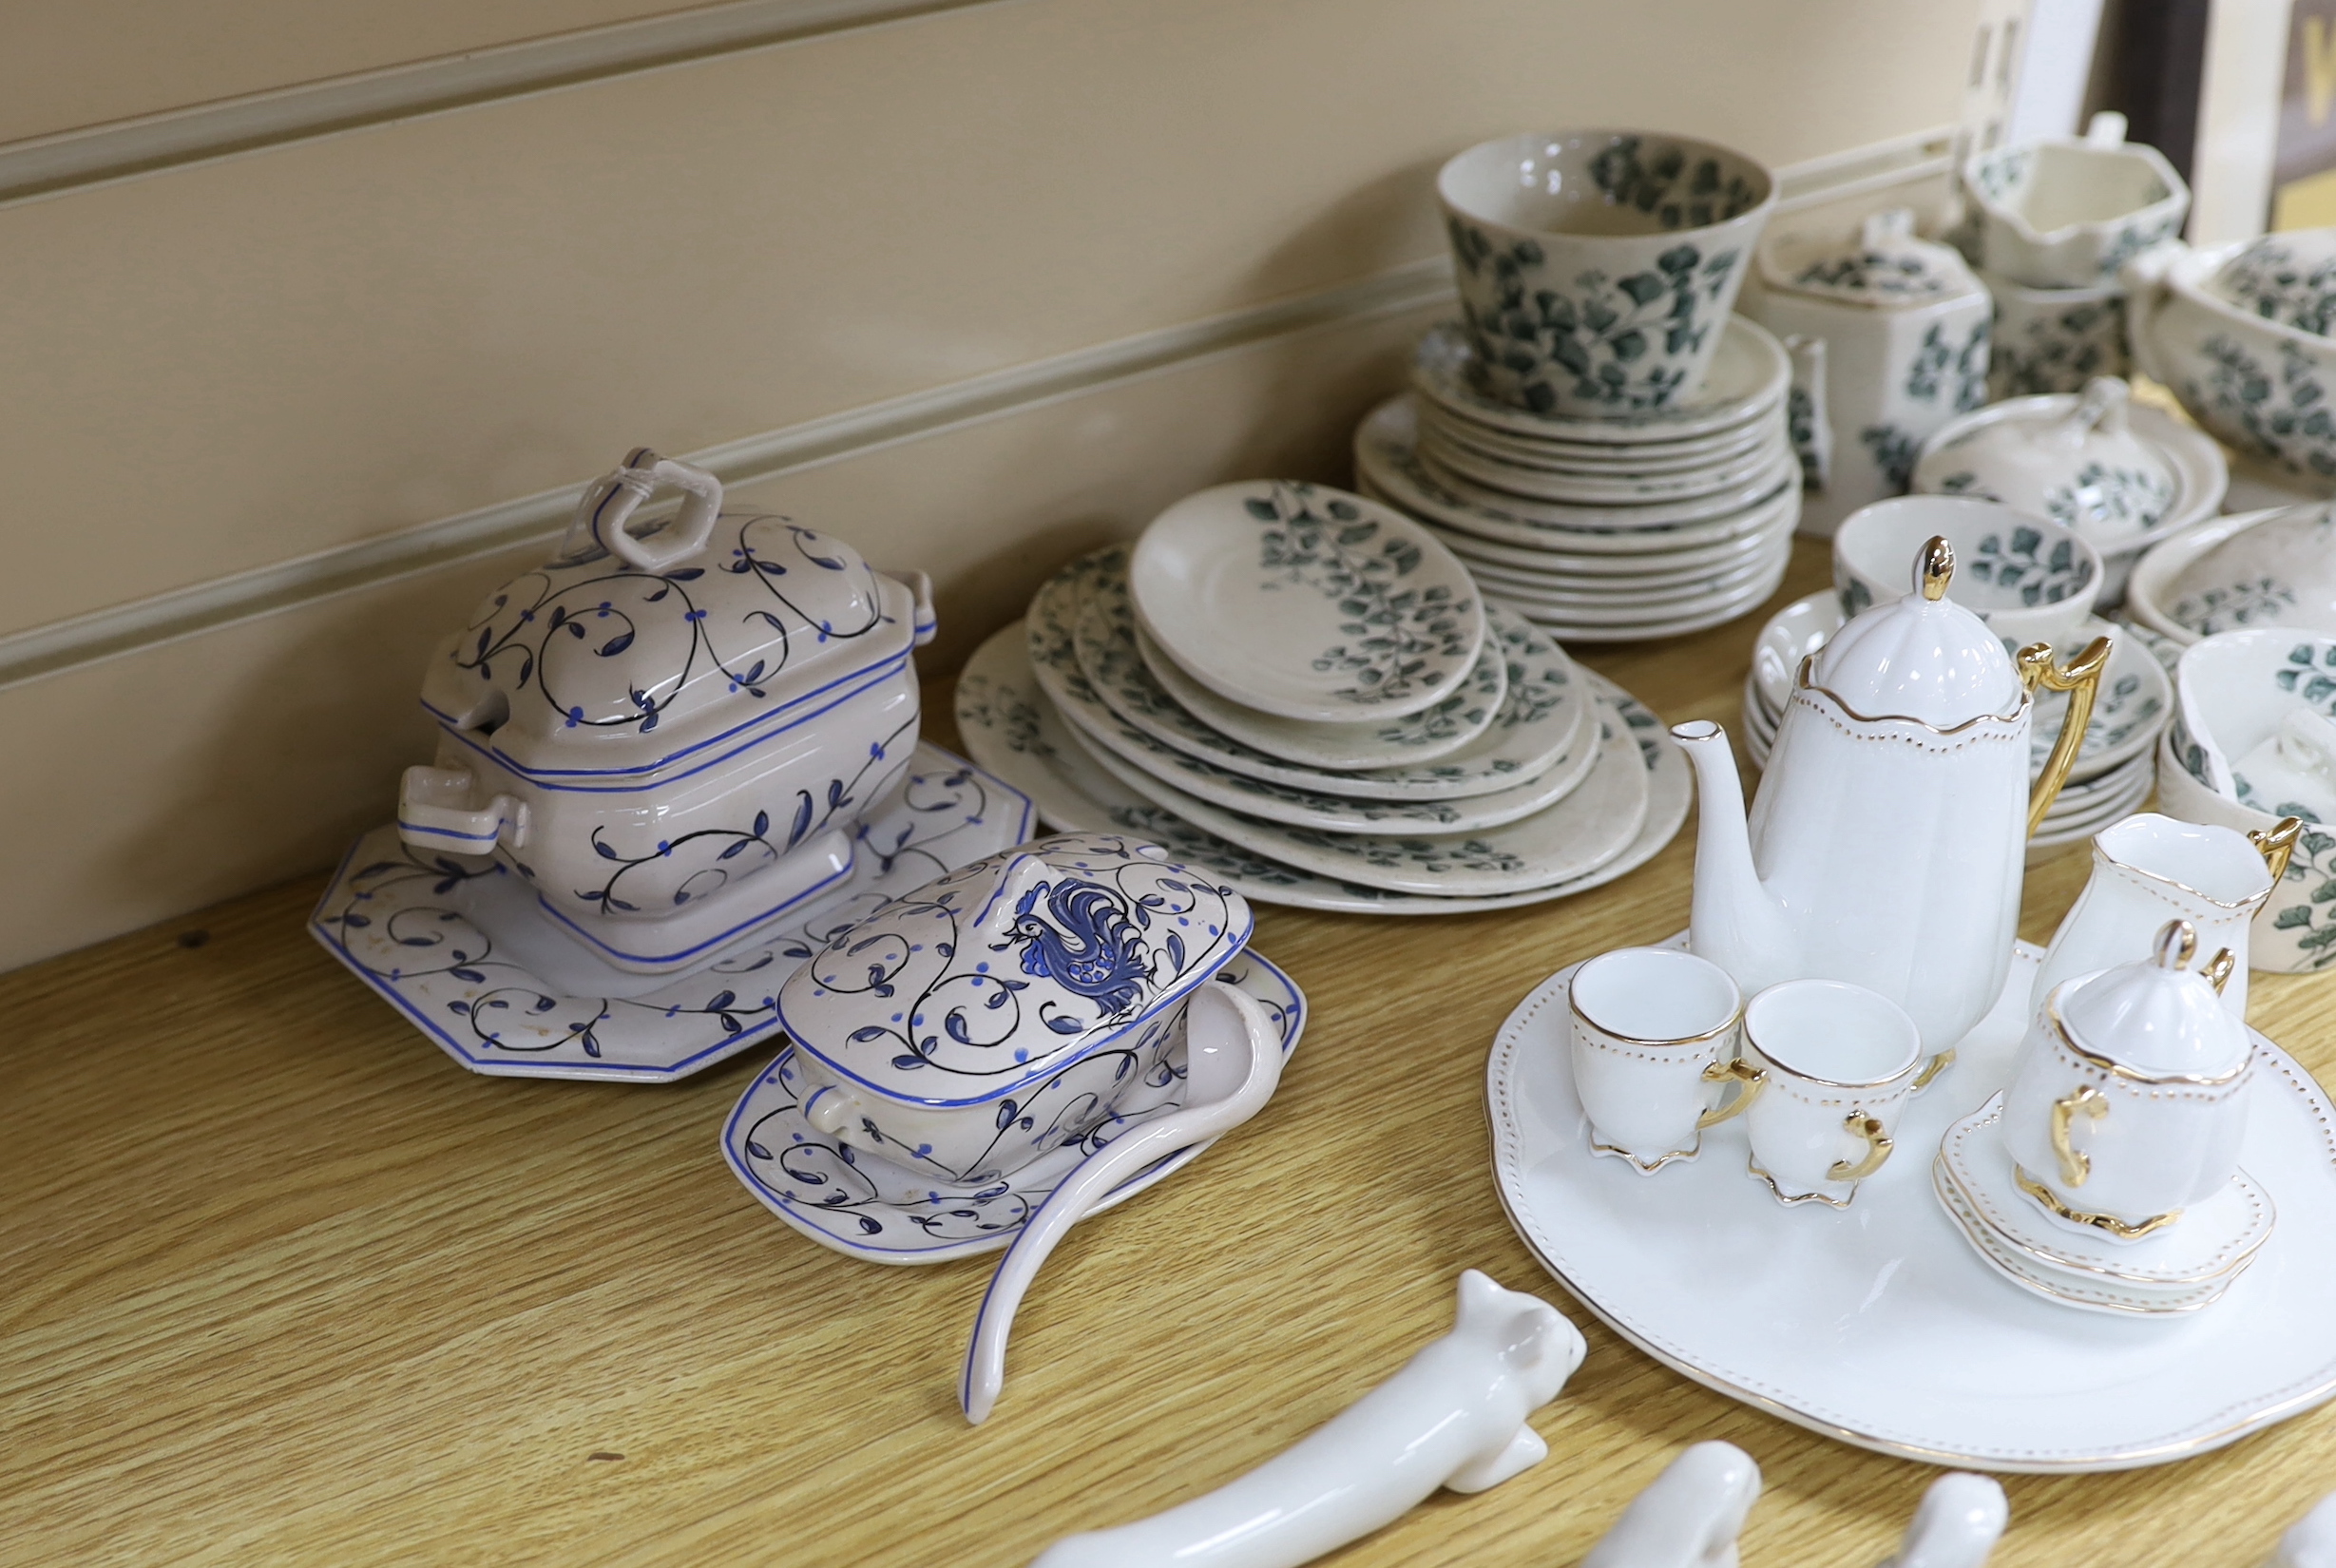 A Ridgways ‘Maiden Hair Fern’ children’s dinner set, together with other miniature tea ware and animalistic knife rests